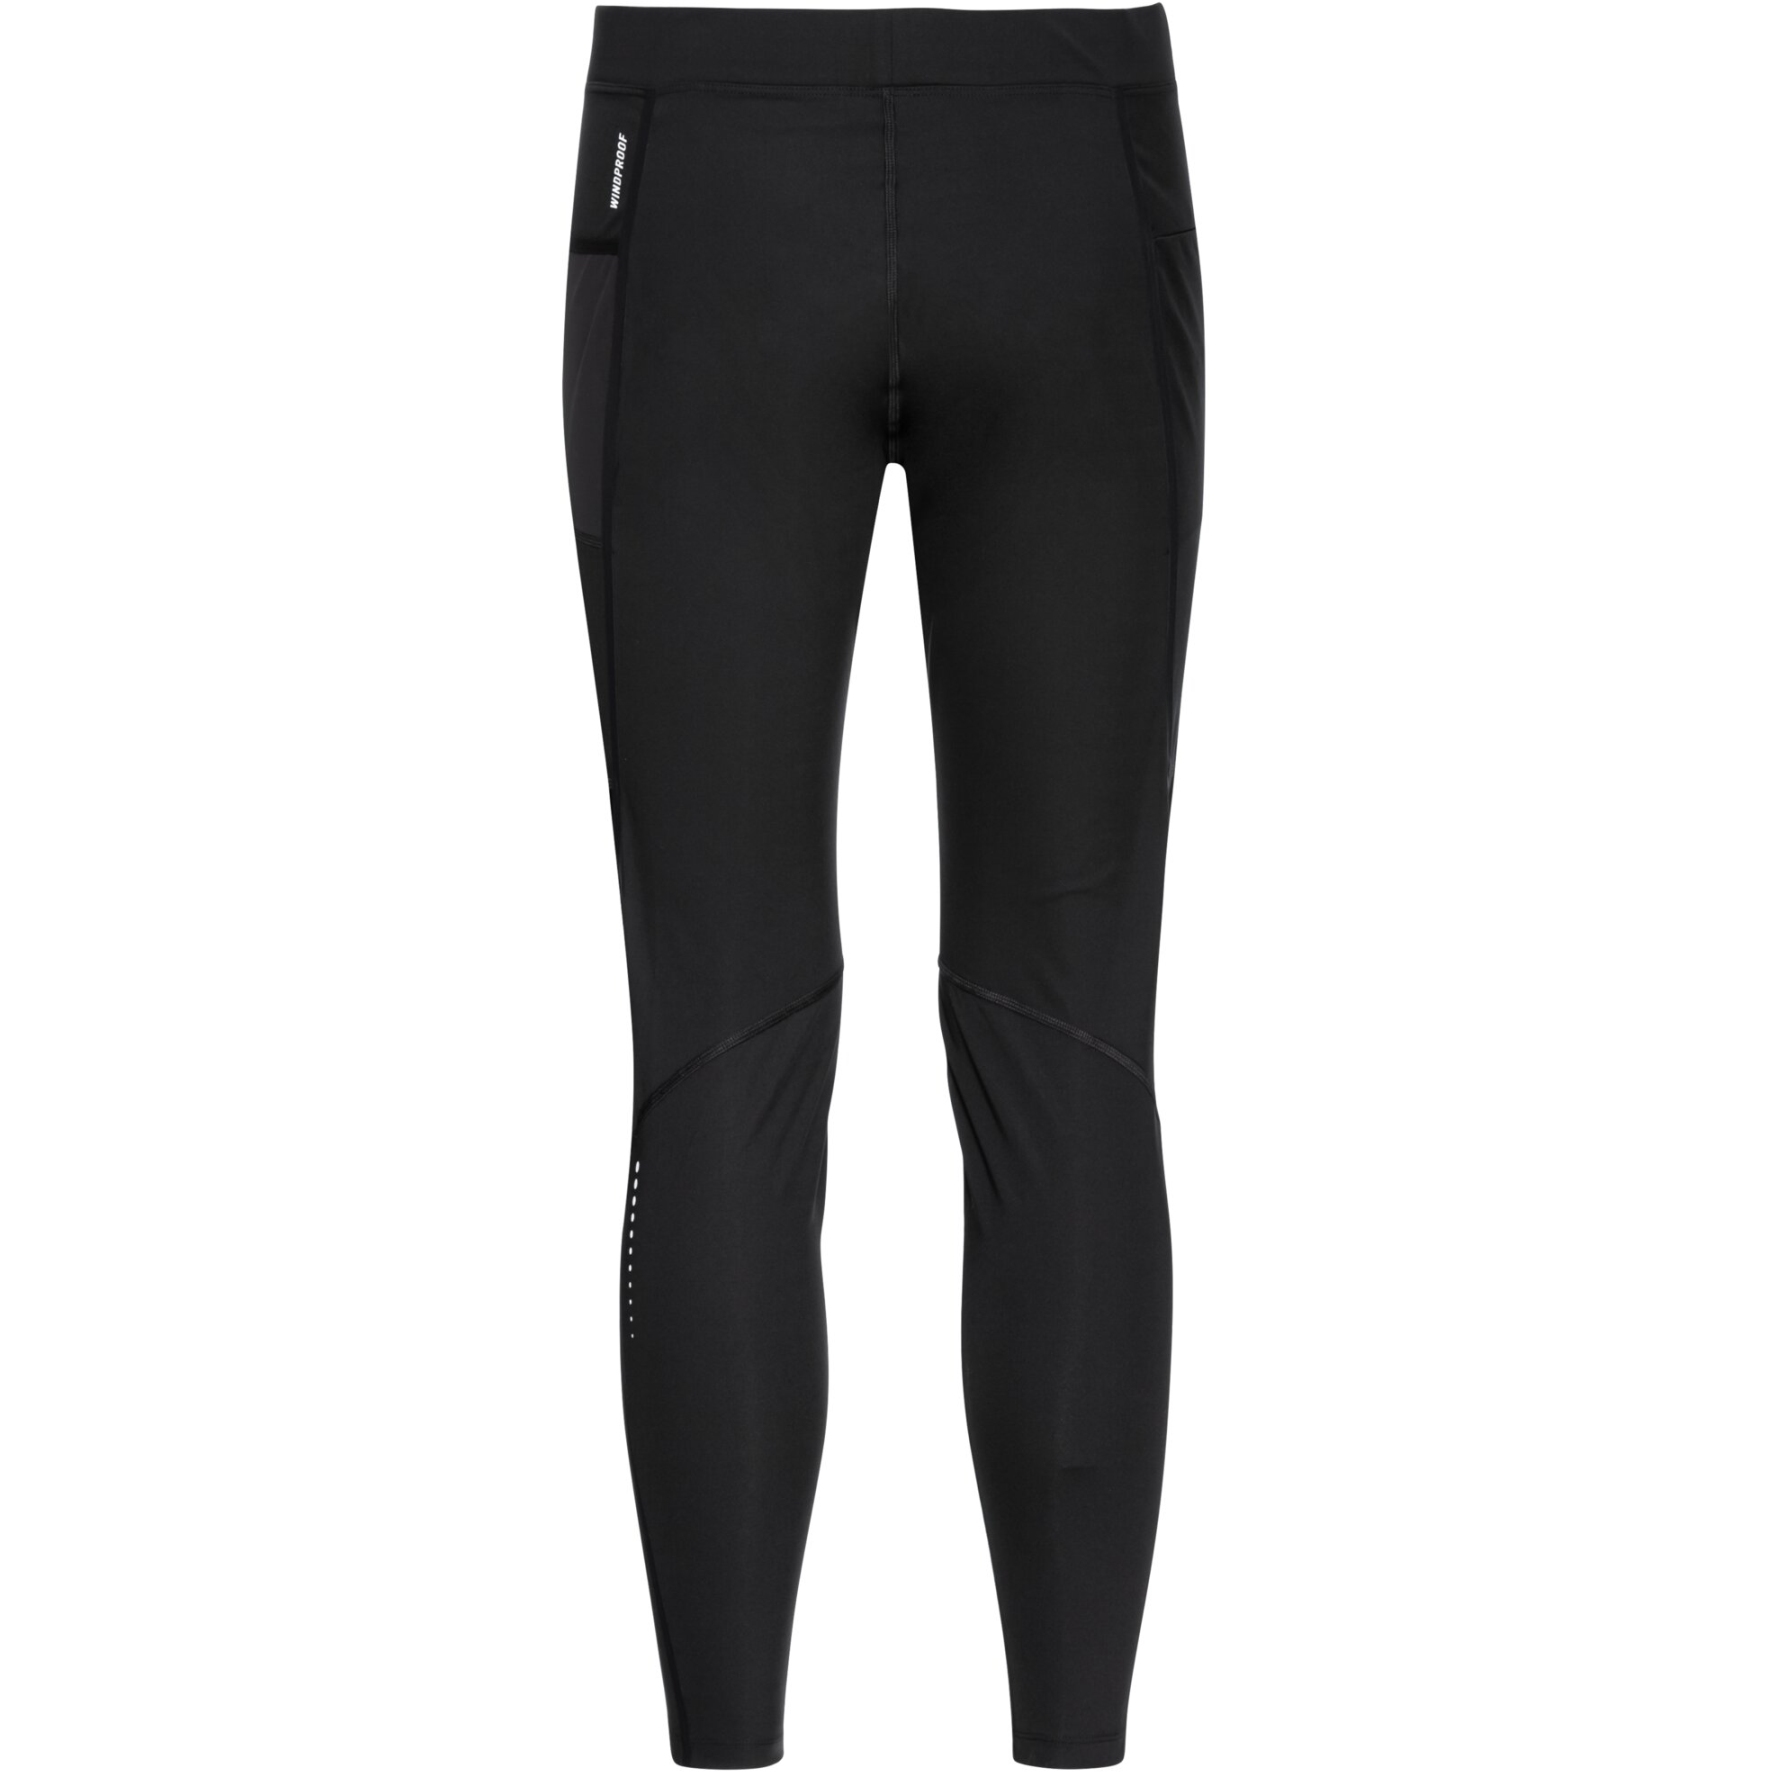 Odlo Zeroweight Warm Running and Training Tights Men - black